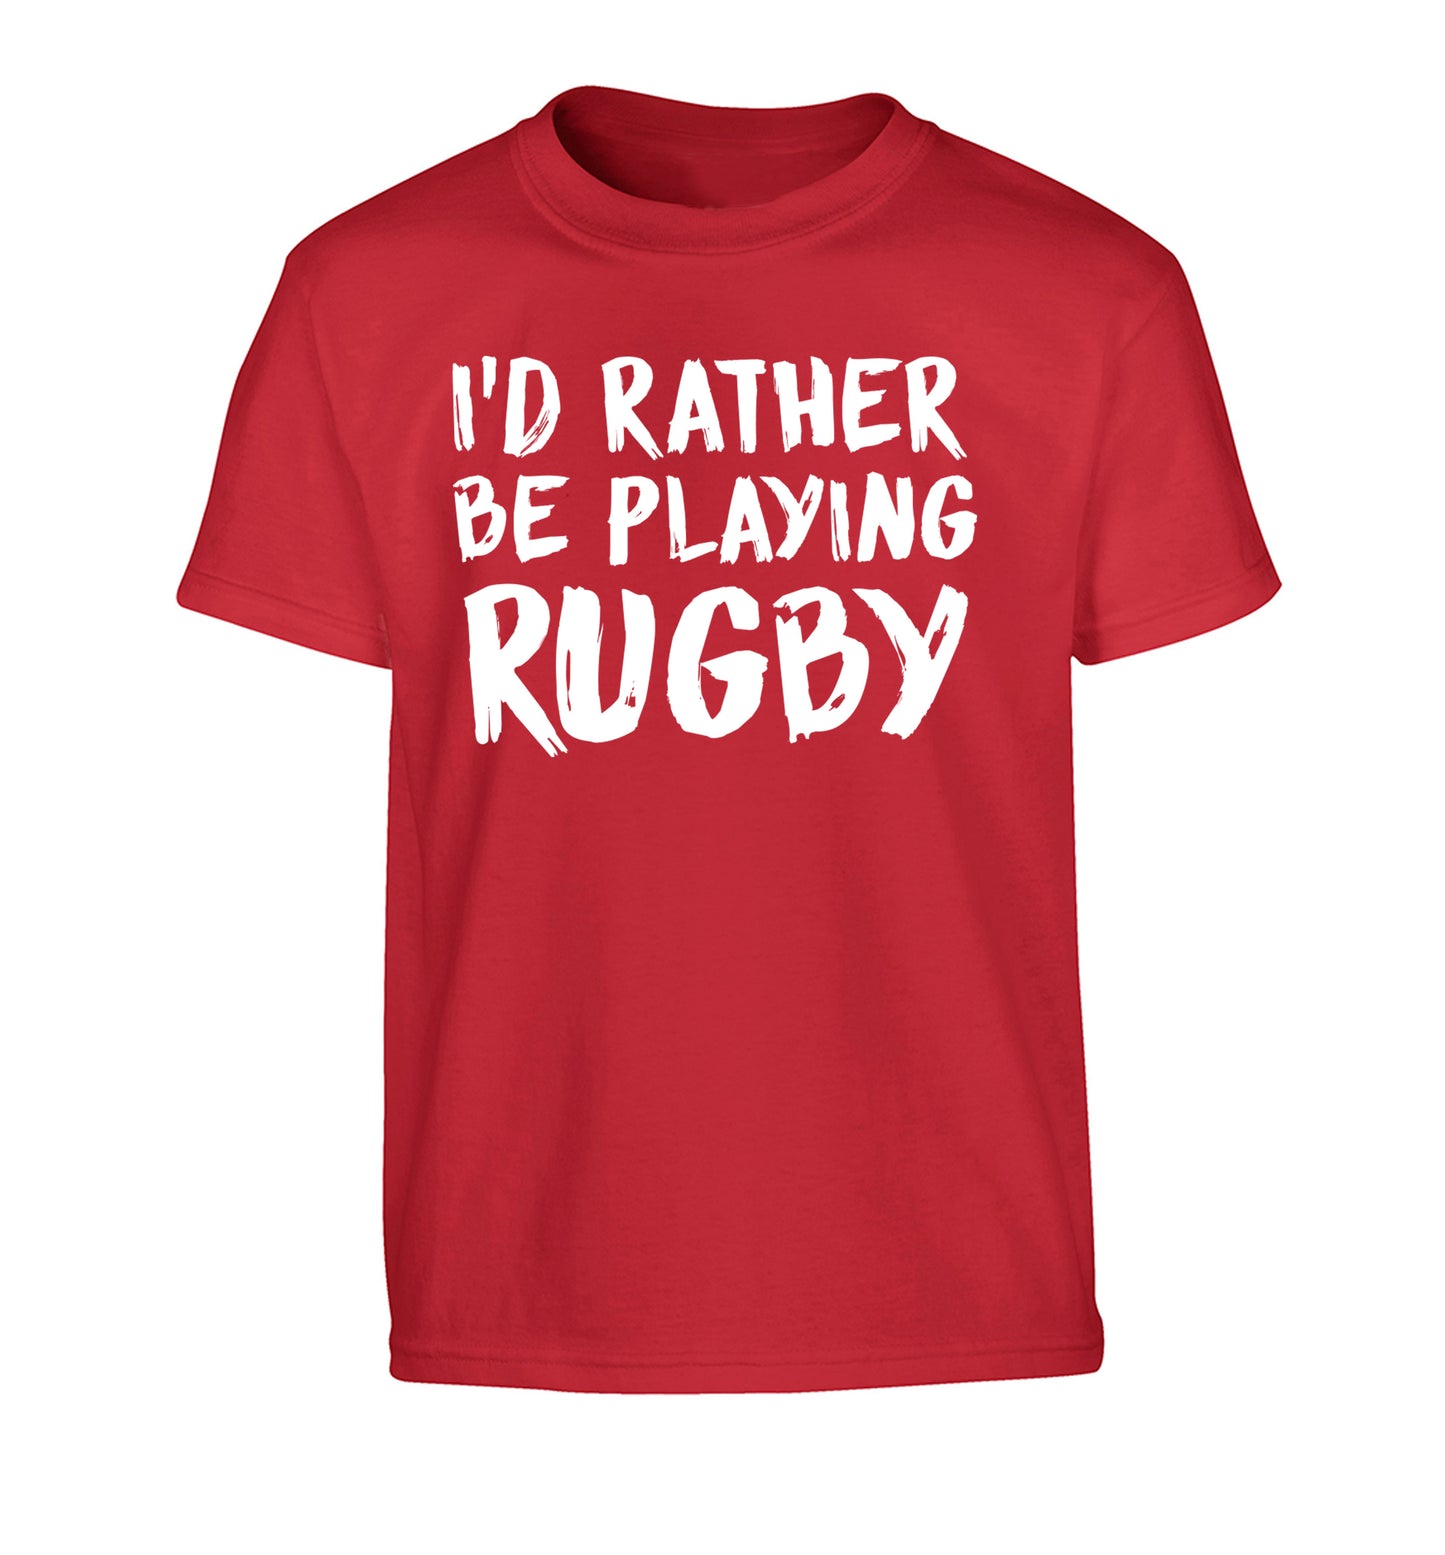 I'd rather be playing rugby Children's red Tshirt 12-13 Years